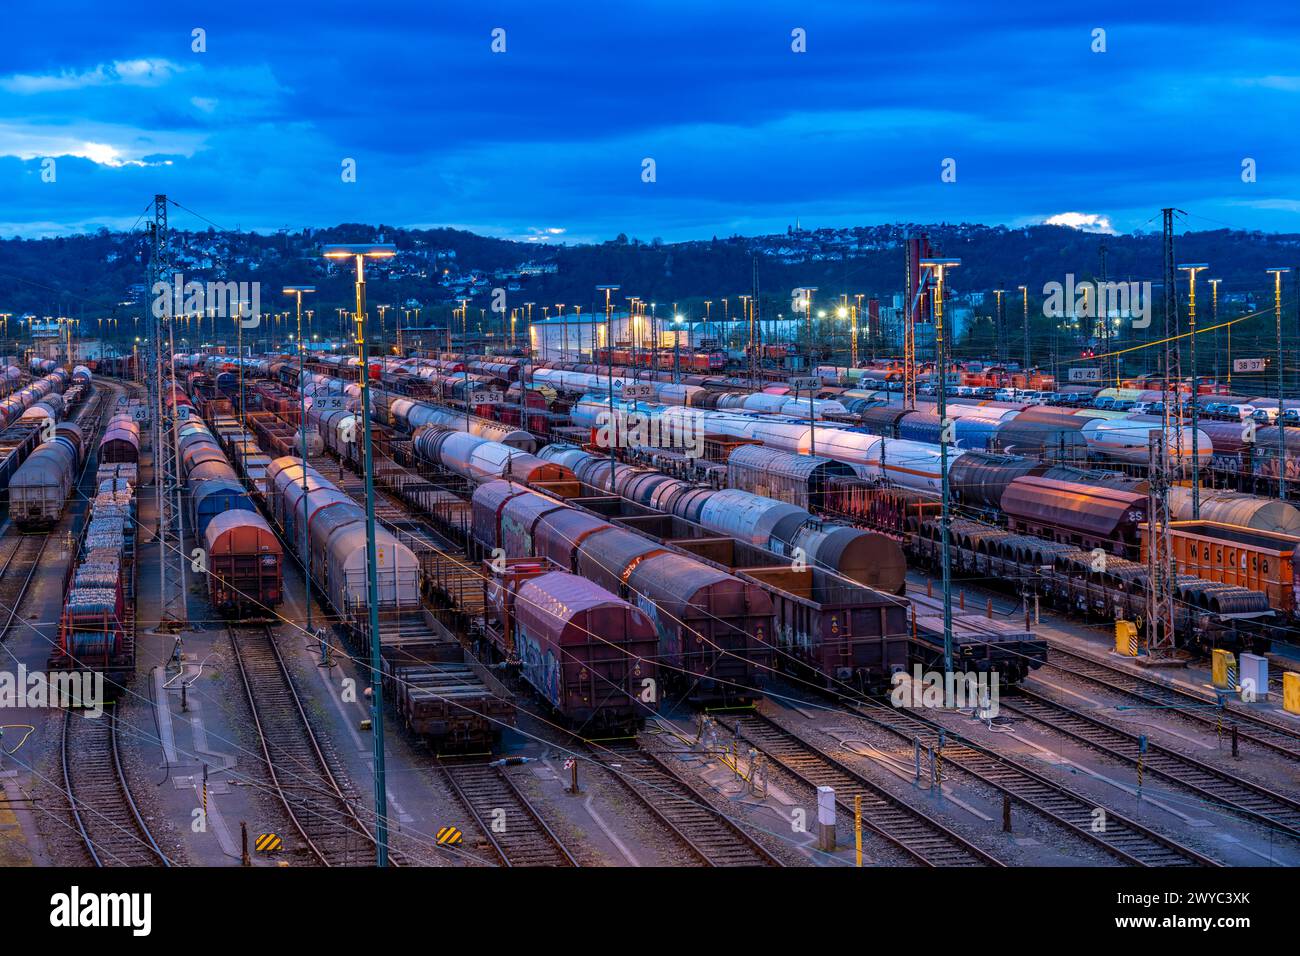 The Hagen-Vorhalle marshalling yard, one of the 9 largest in Germany, is located on the Wuppertal-Dortmund railroad line and has 40 directional tracks Stock Photo